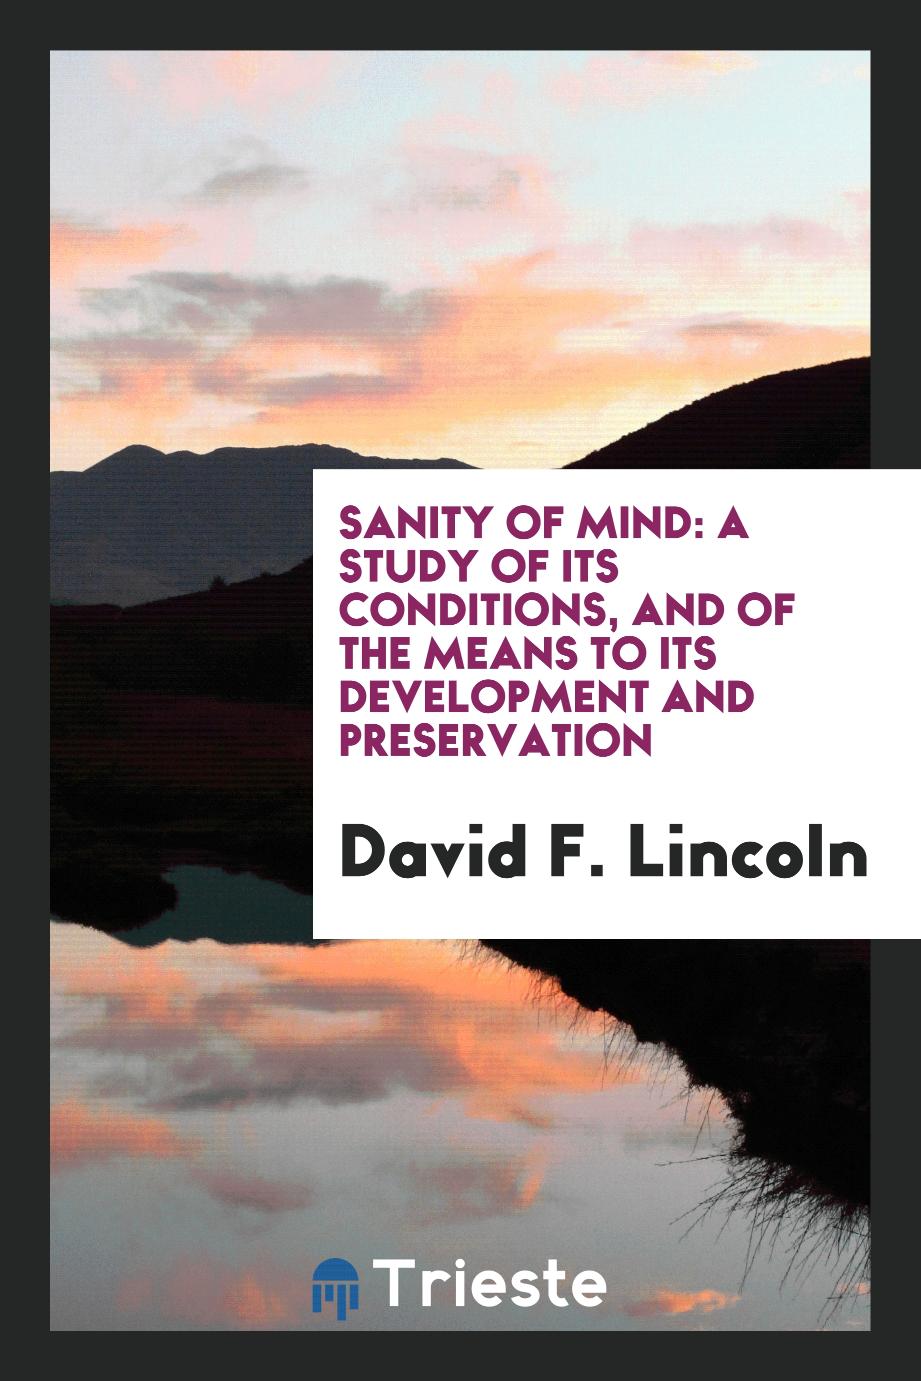 Sanity of Mind: A Study of Its Conditions, and of the Means to Its Development and Preservation